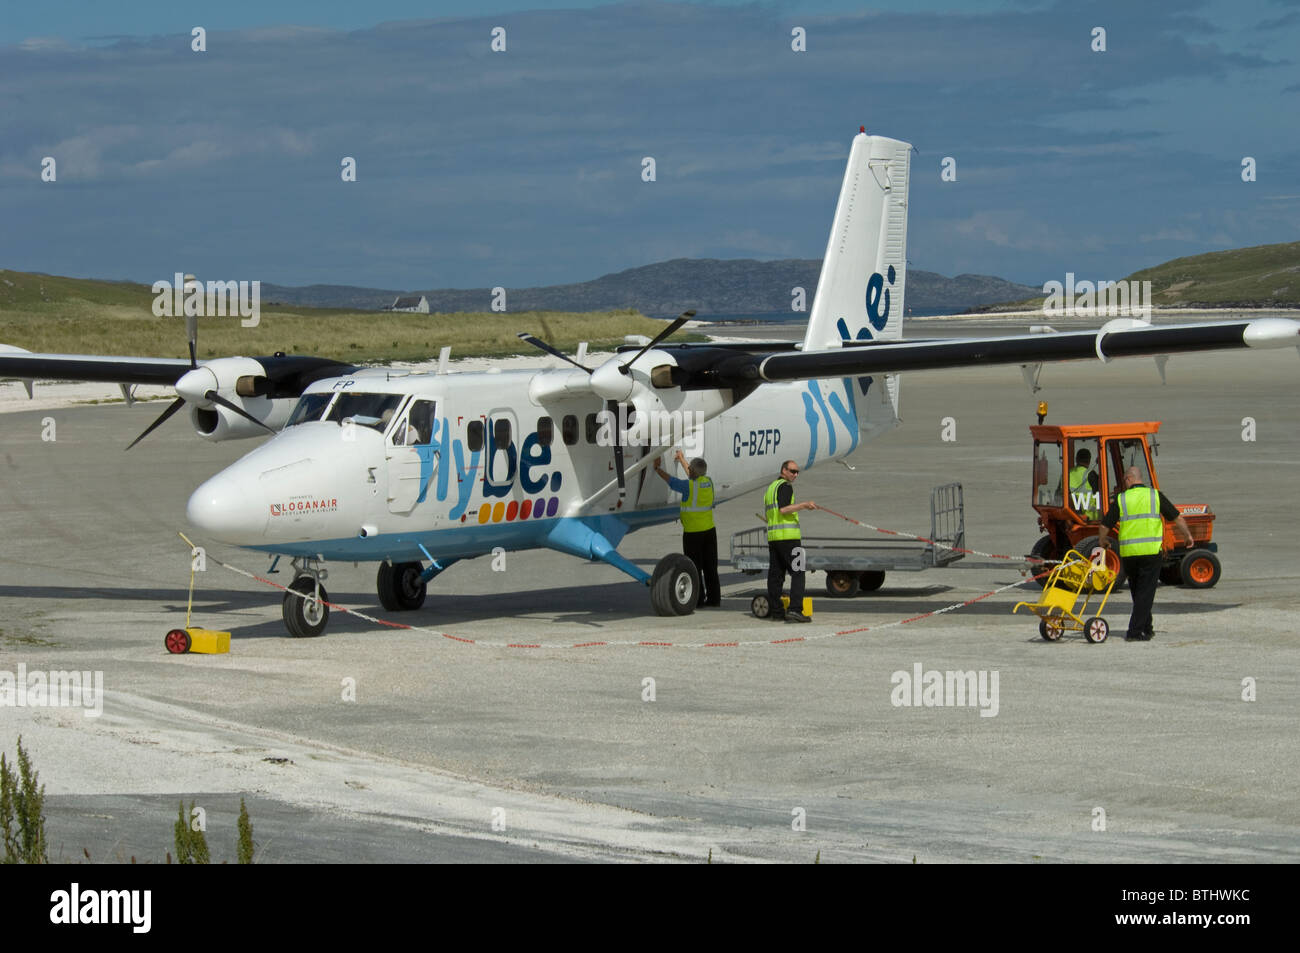 A twin Otter Aircraft Boarding on the cockleshell beach at Barra Airstrip, Outer Hebrides, Scotland. SCO 6676 Stock Photo